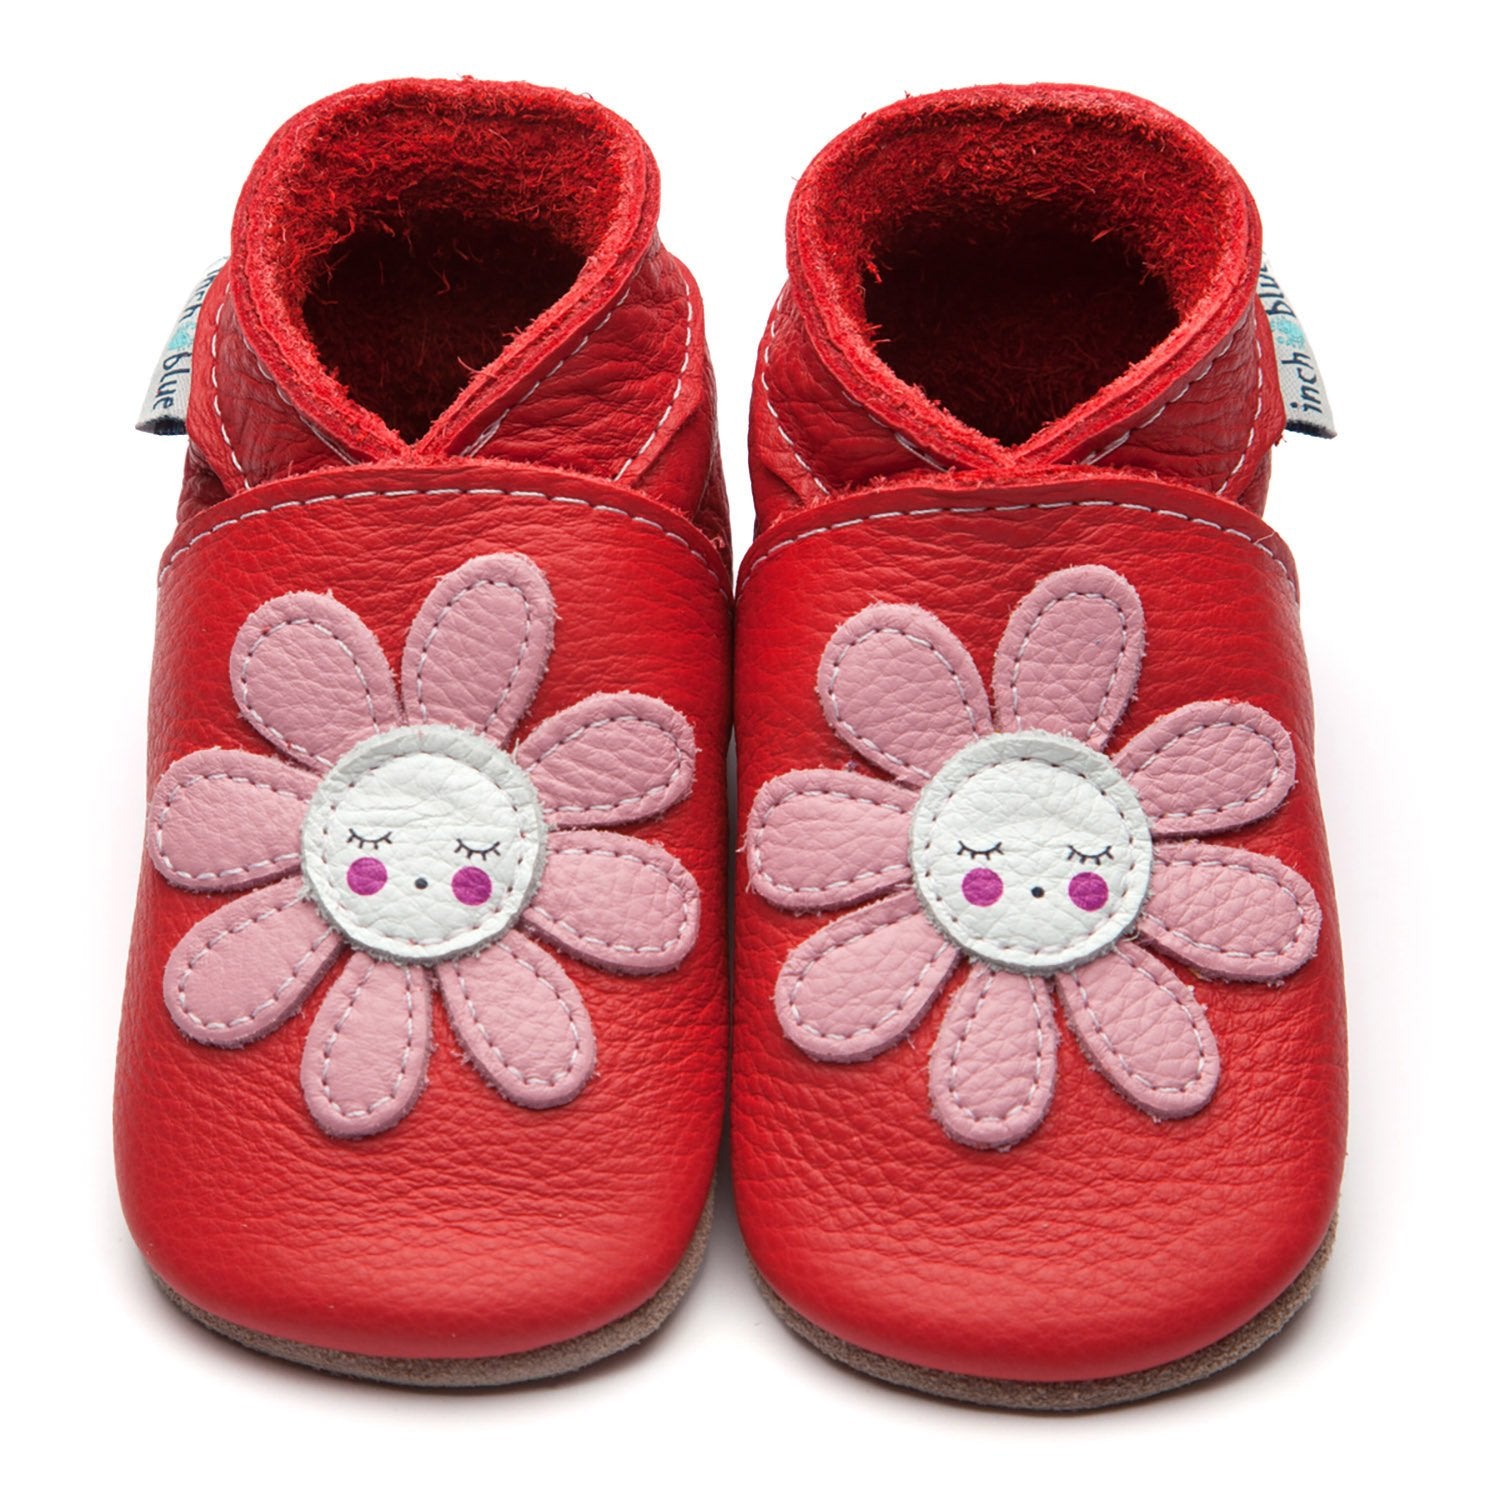 Inch Blue Baby Shoes Dozy Daisy 4043 Red Footwear 0-6M / Red,6-12M / Red,12-18M / Red